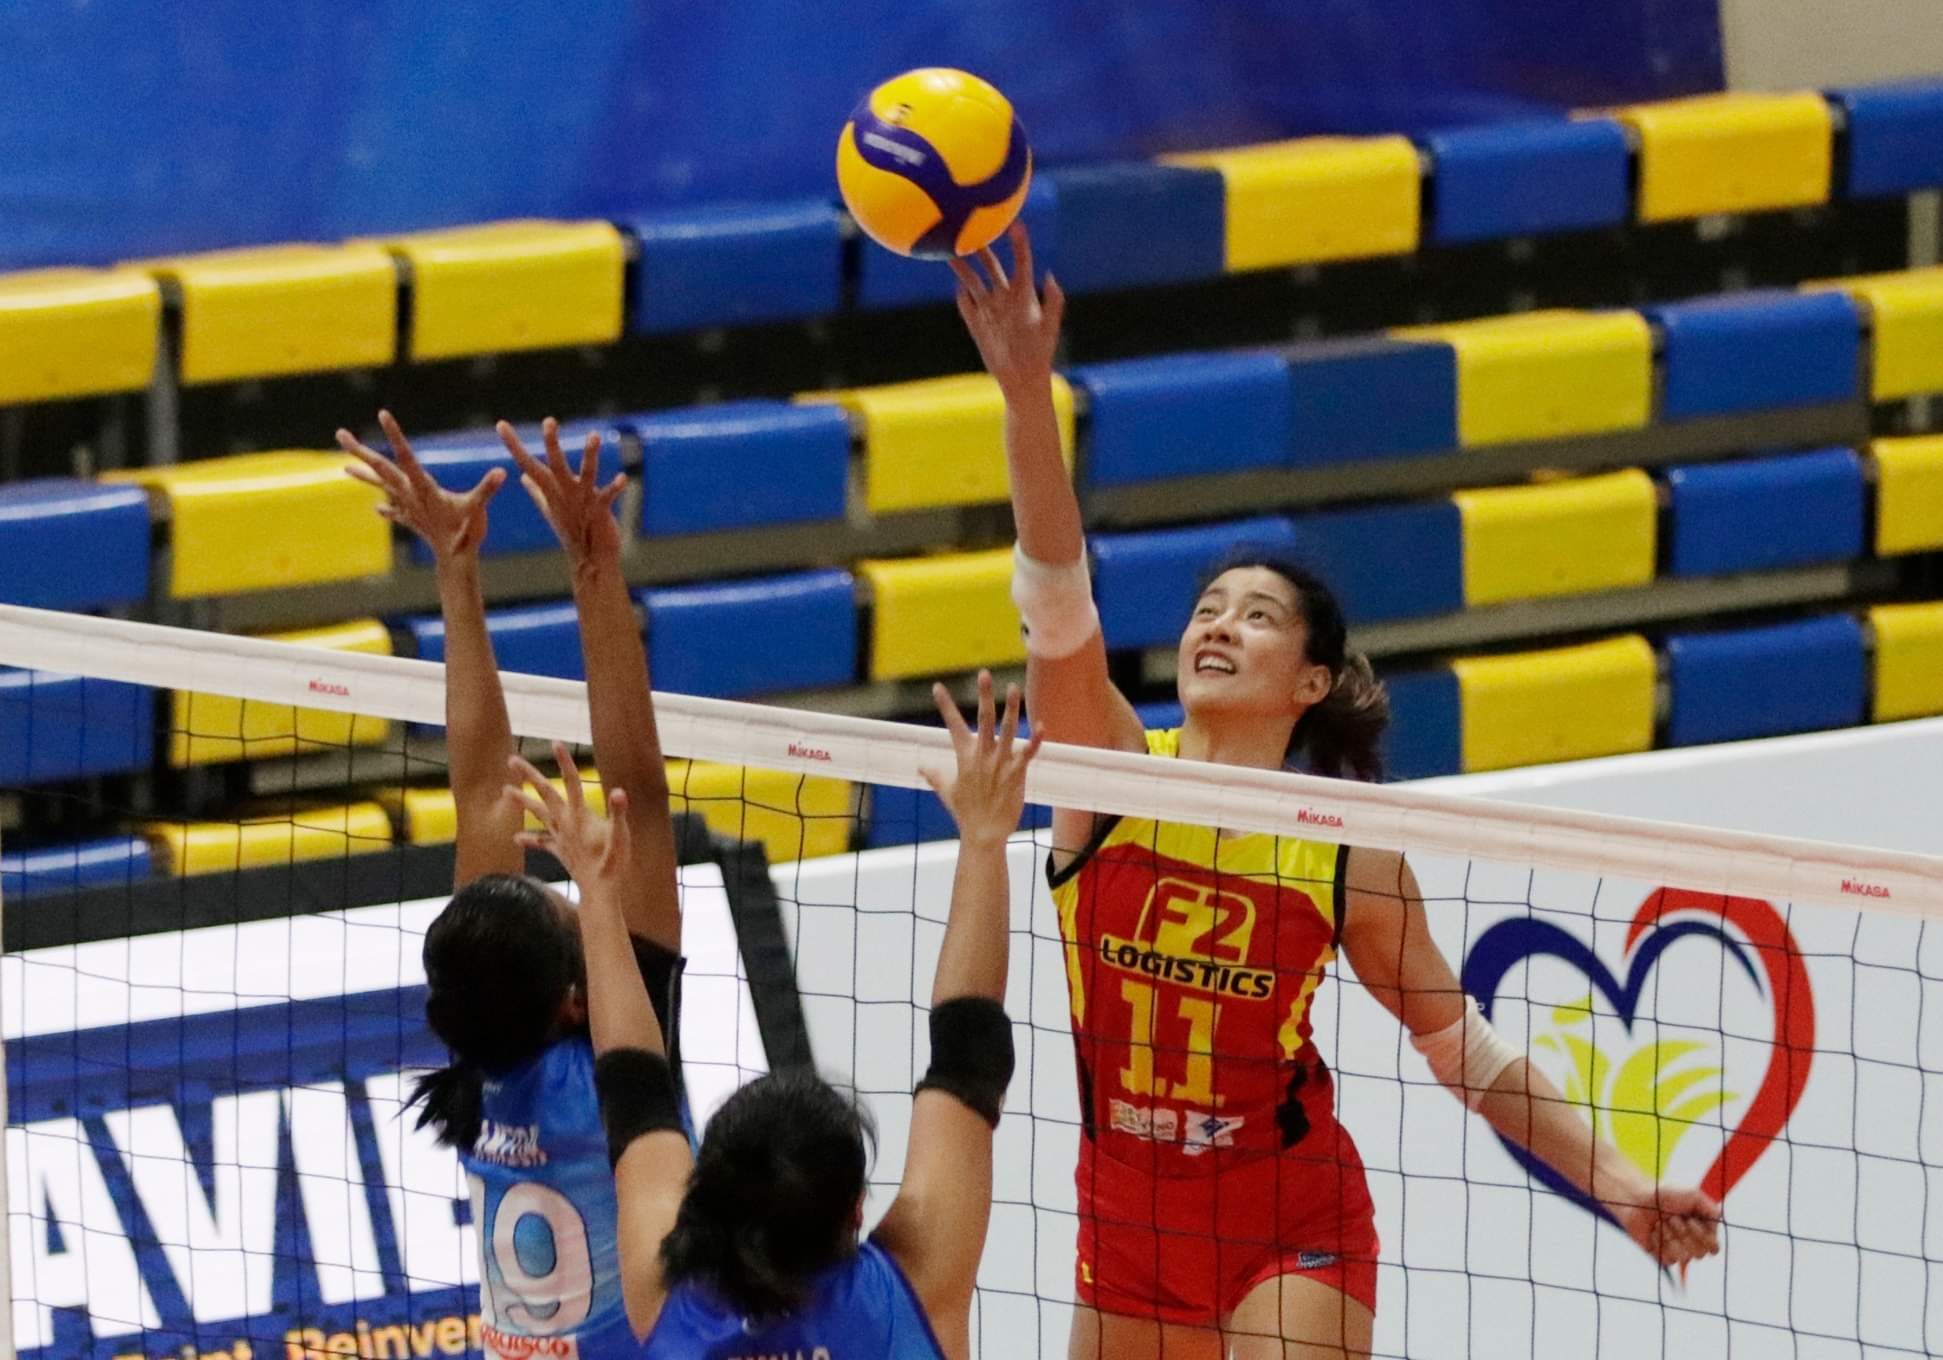 F2 Logistics on the brink of clinching Champions League title